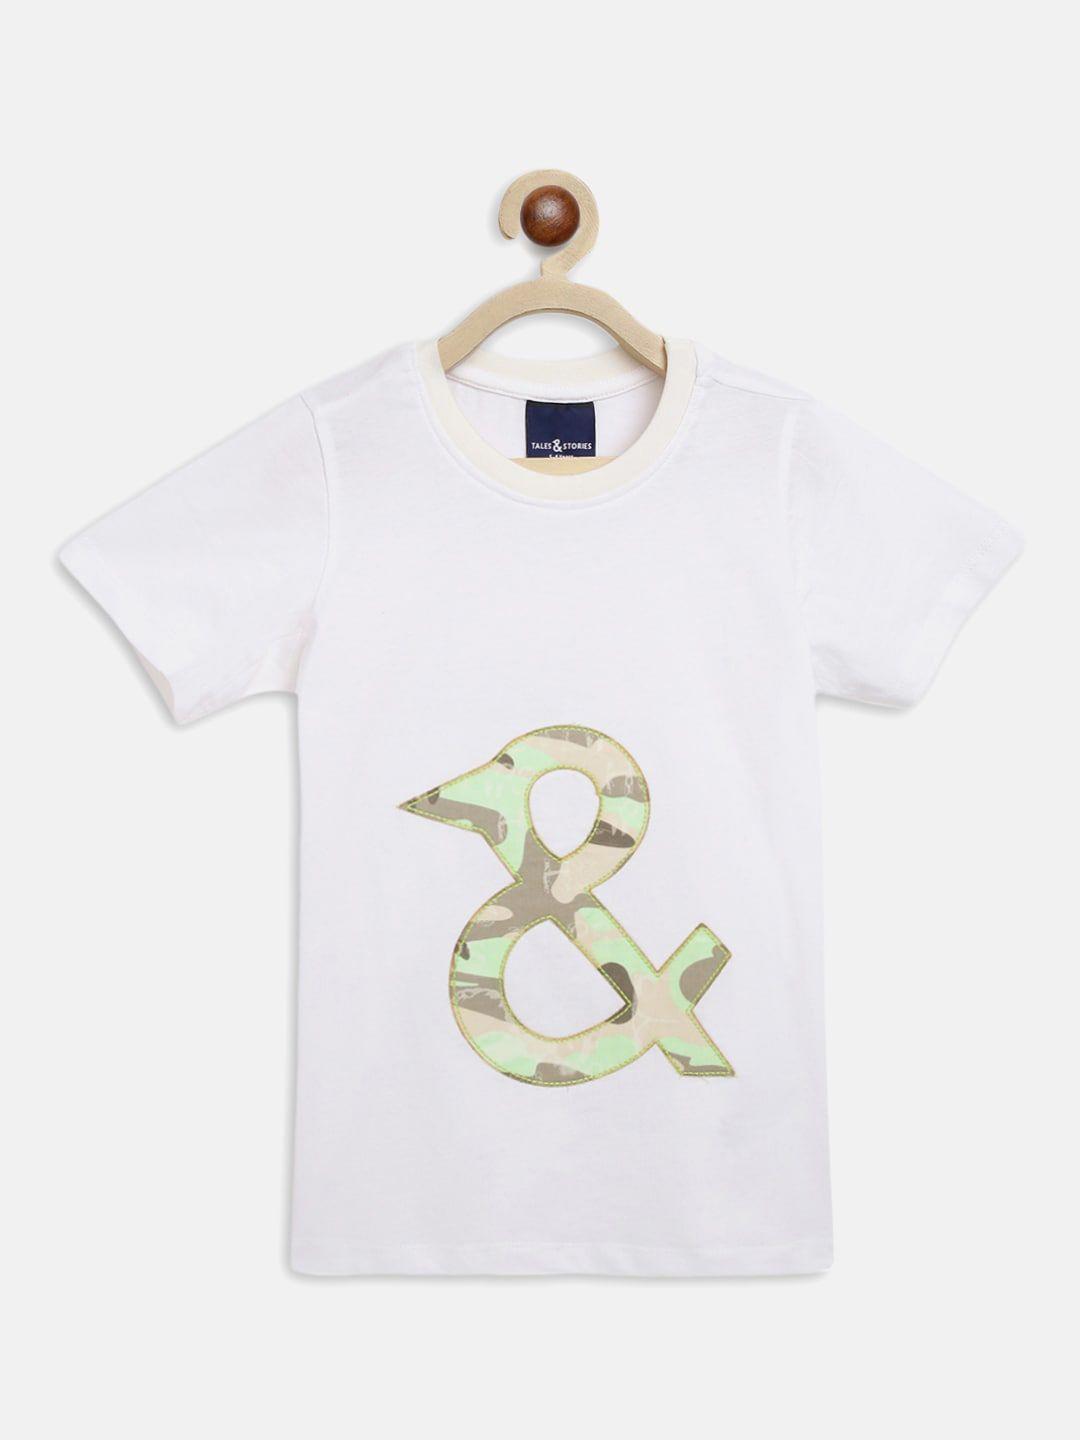 tales-&-stories-boys-graphic-printed-cotton-casual-t-shirt